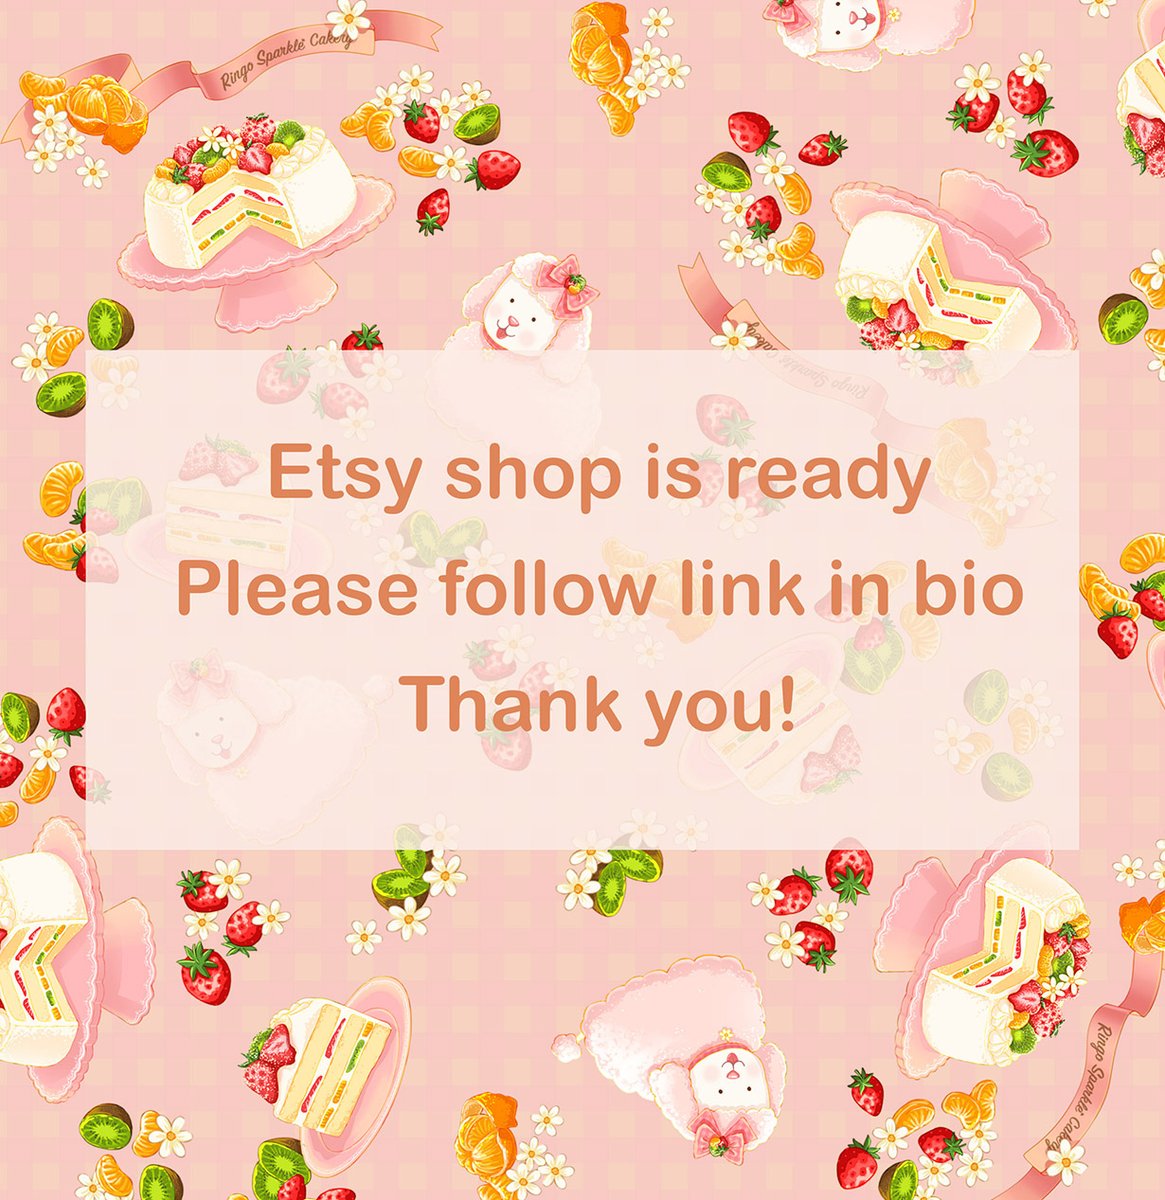 Etsy shop is finally set up 😃 Only newer products are available for now. The older items will be added in this weekend. Thank you 💕 

#indieshop #etsyshop #cute #kawaii #lolitafashion #eglfashion